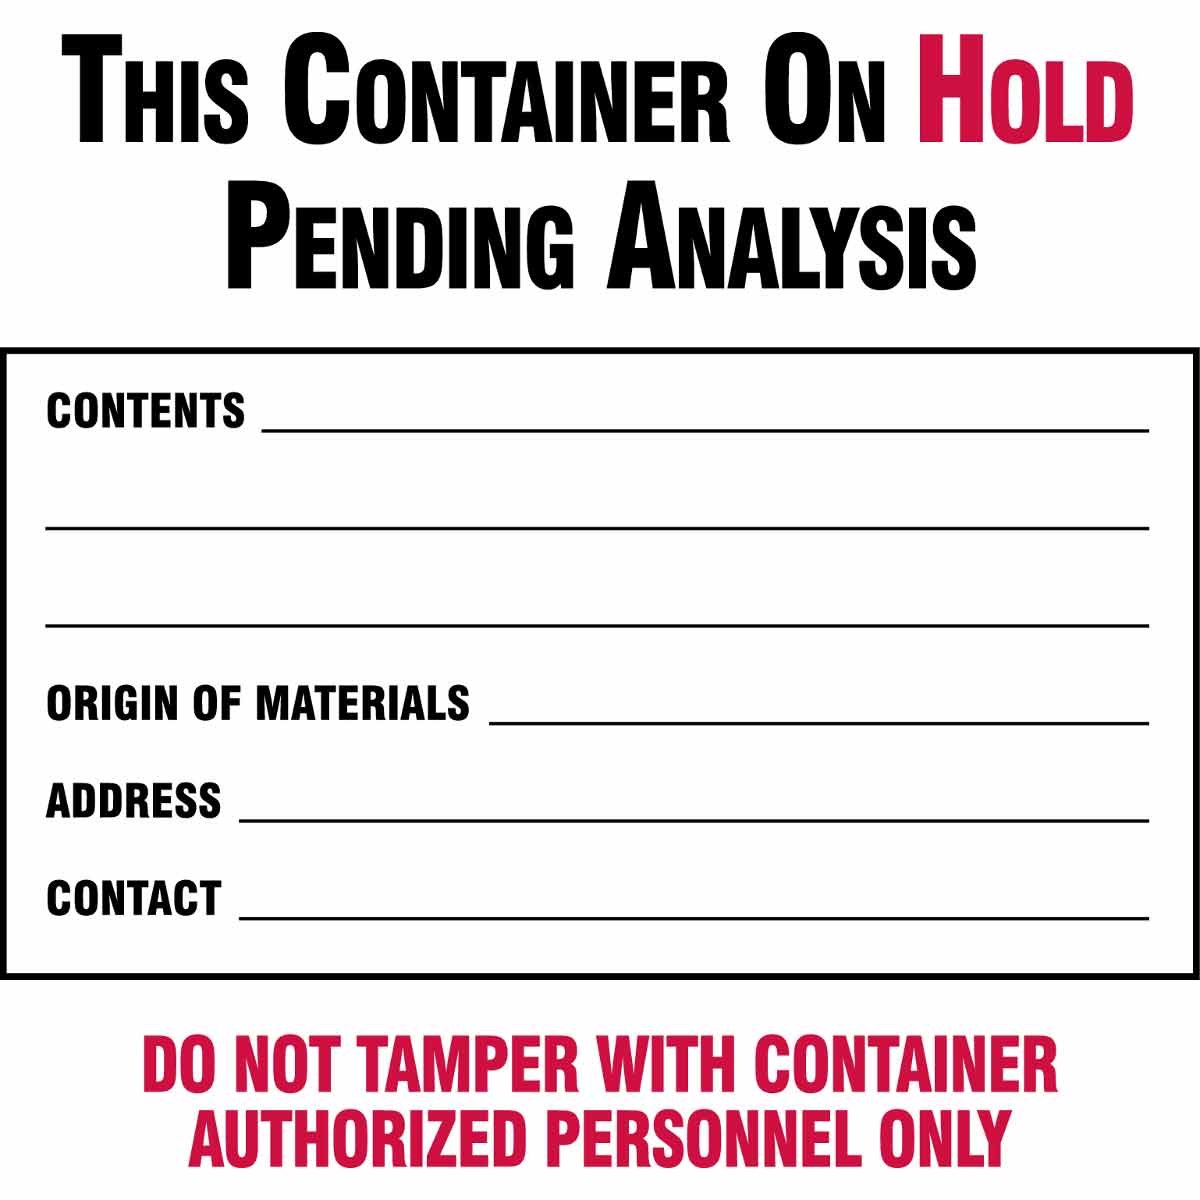 Brady This Container on Hold Pending Analysis Labels, 100PCK (English), Black and Red - Carbon Bulk Sales